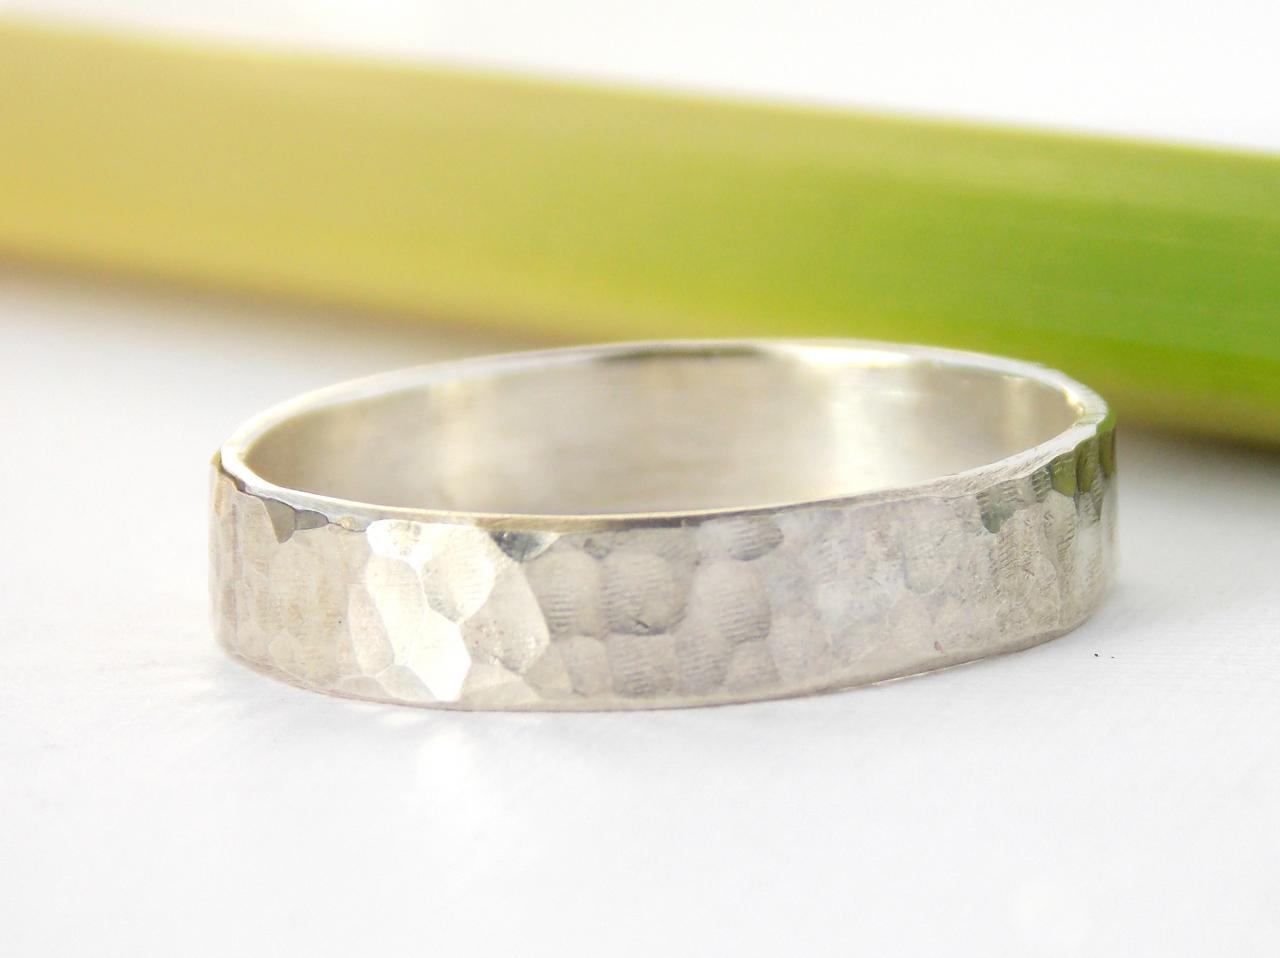 Hammered Band Ring -sterling silver ring, textured ring, simple ring, Silver Ring, hammered texture ring, hammered ring, wedding band